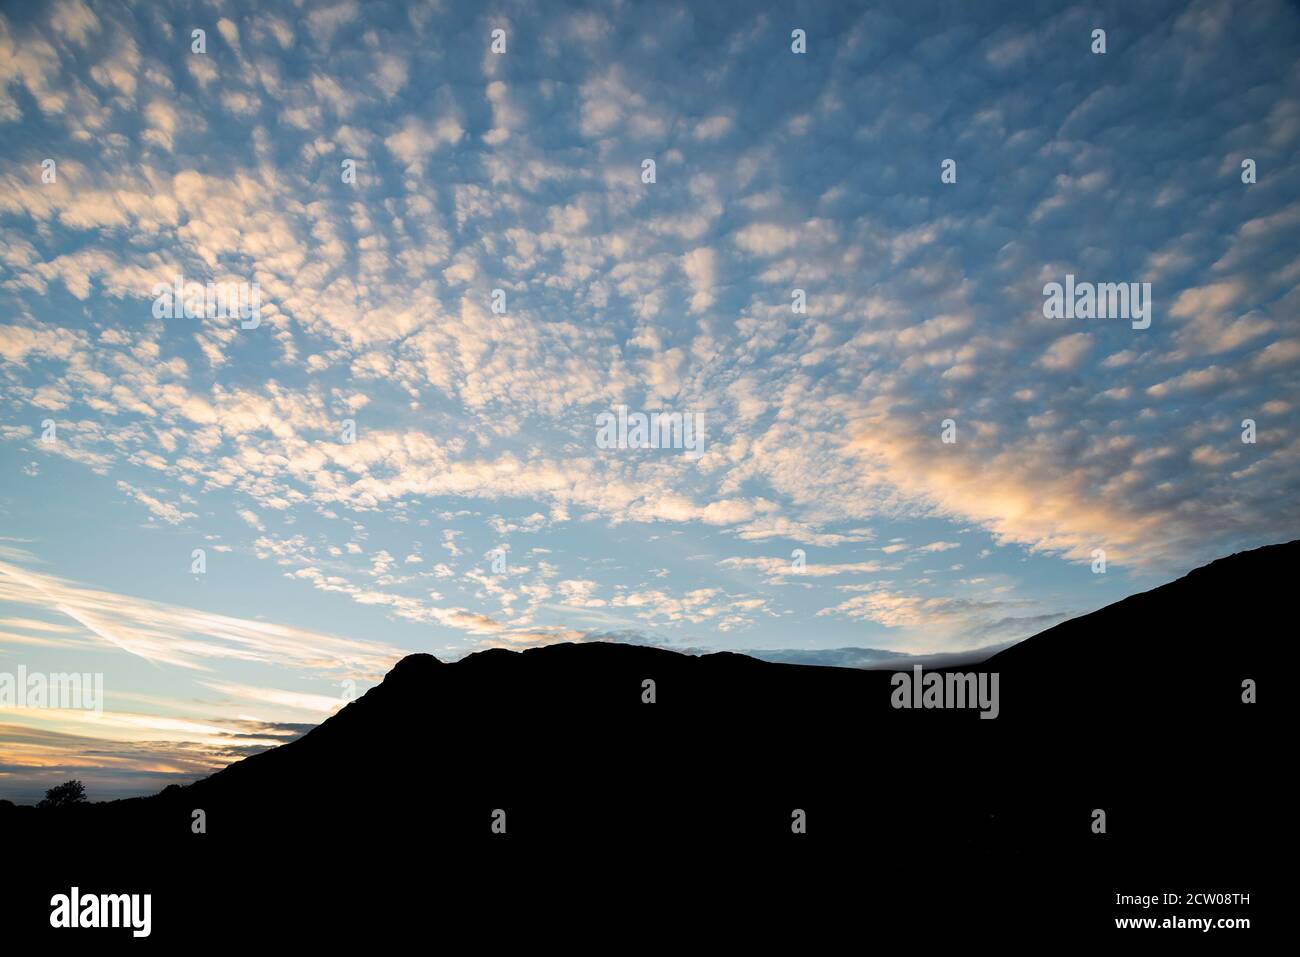 Stunning landscape image of colorful mackerel sky cloud formation in late Summer Stock Photo